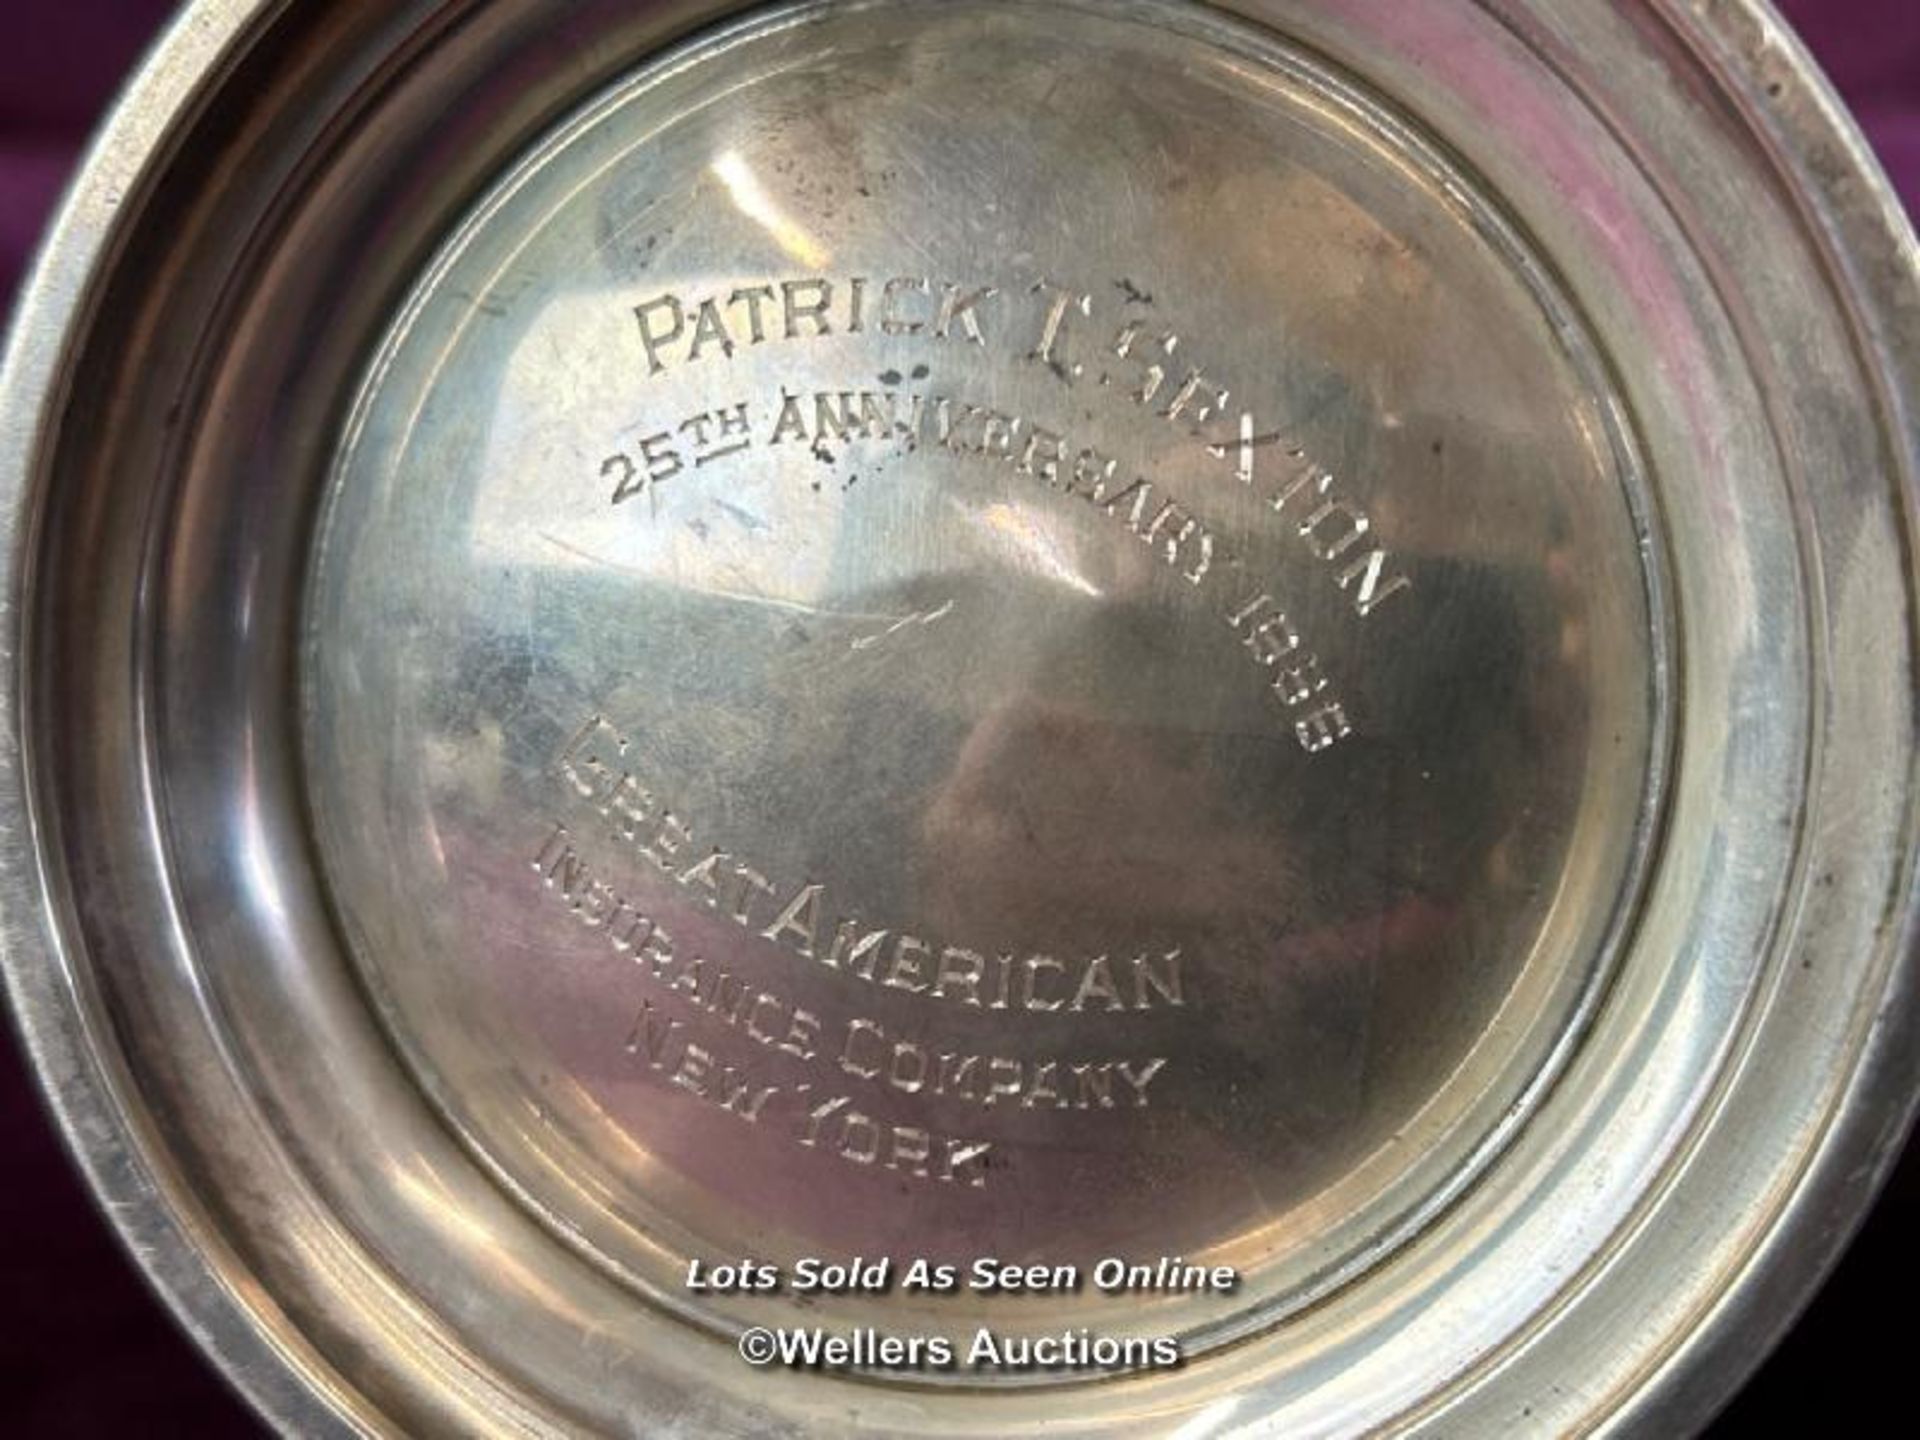 A PRESENTATION SILVER PLATED WATER JUG, ENGRAVED 'PATRICK T. SEXTON, 25TH ANNIVERSARY 1956, GREAT - Bild 3 aus 3